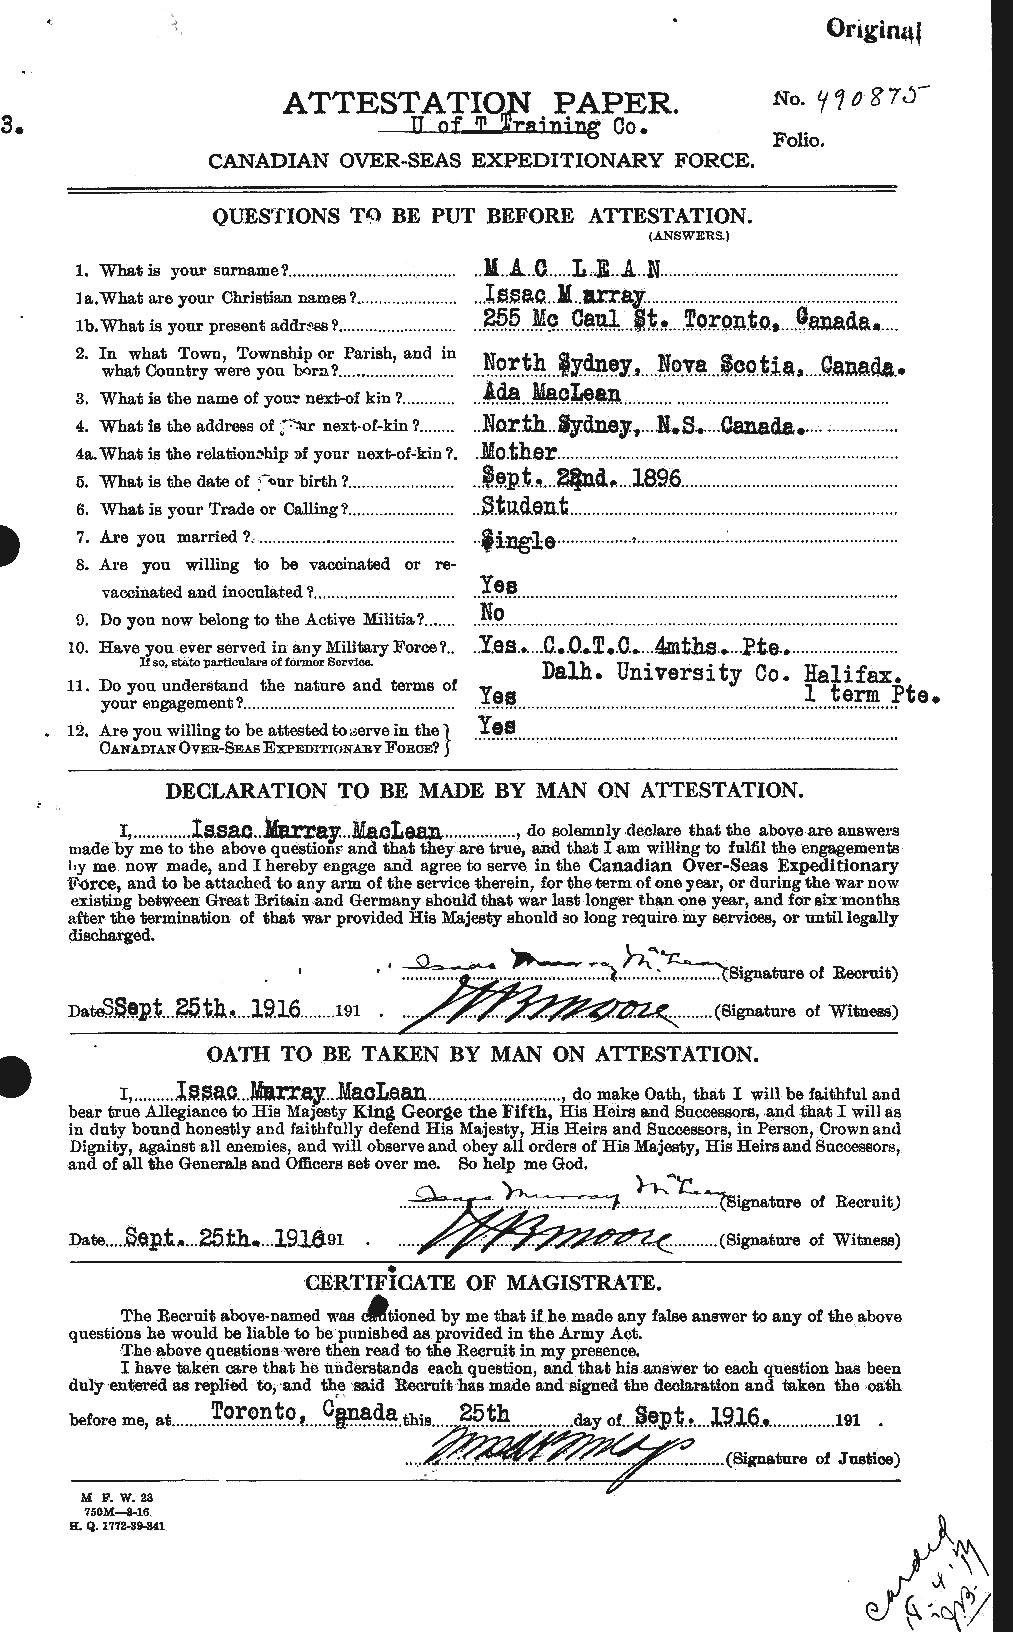 Personnel Records of the First World War - CEF 546166a